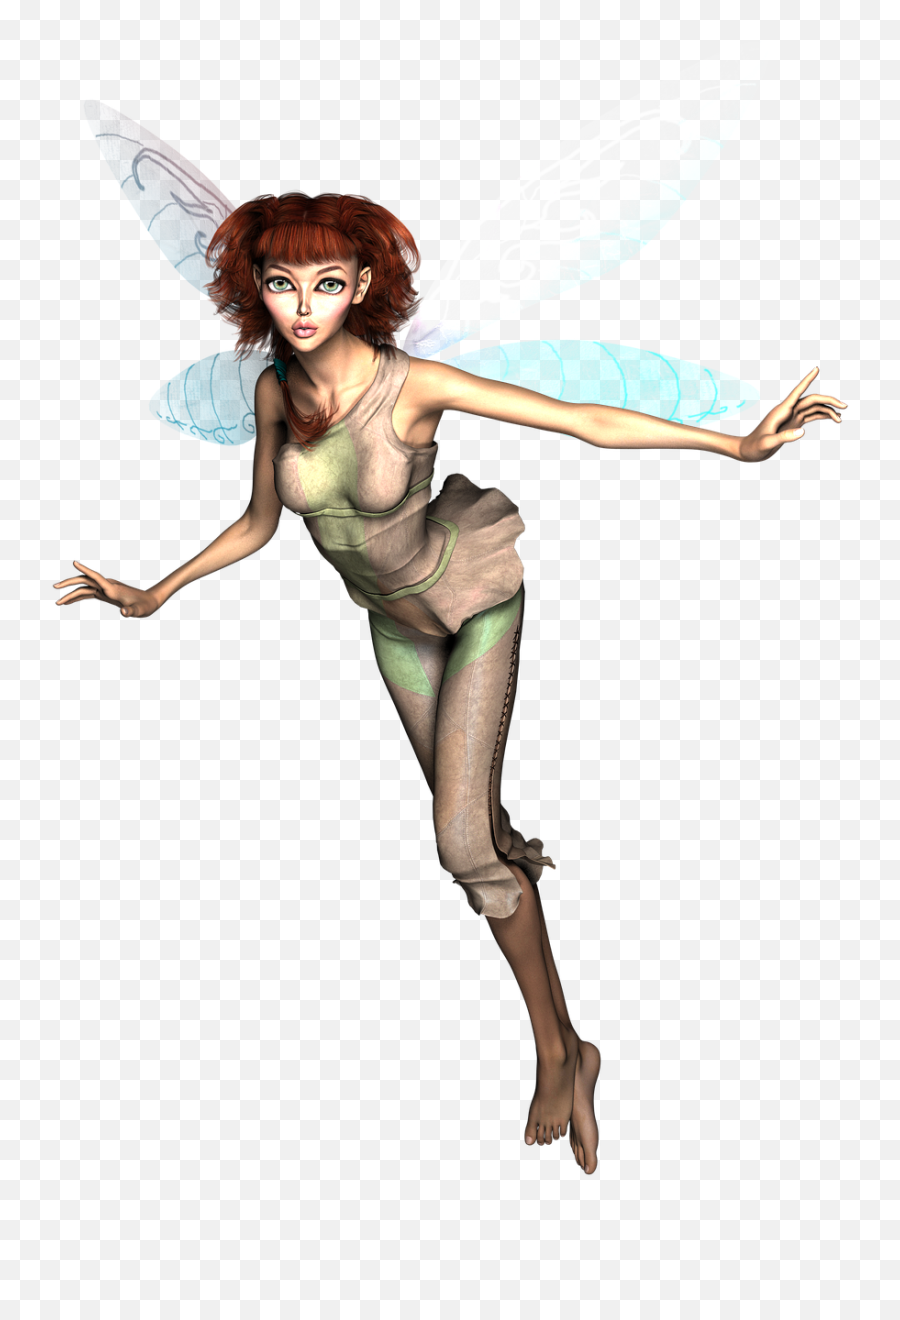 Womanfemale3dcut - Outtransparent Background Free Image 3d Fairy Transparent Png,Woman Transparent Background